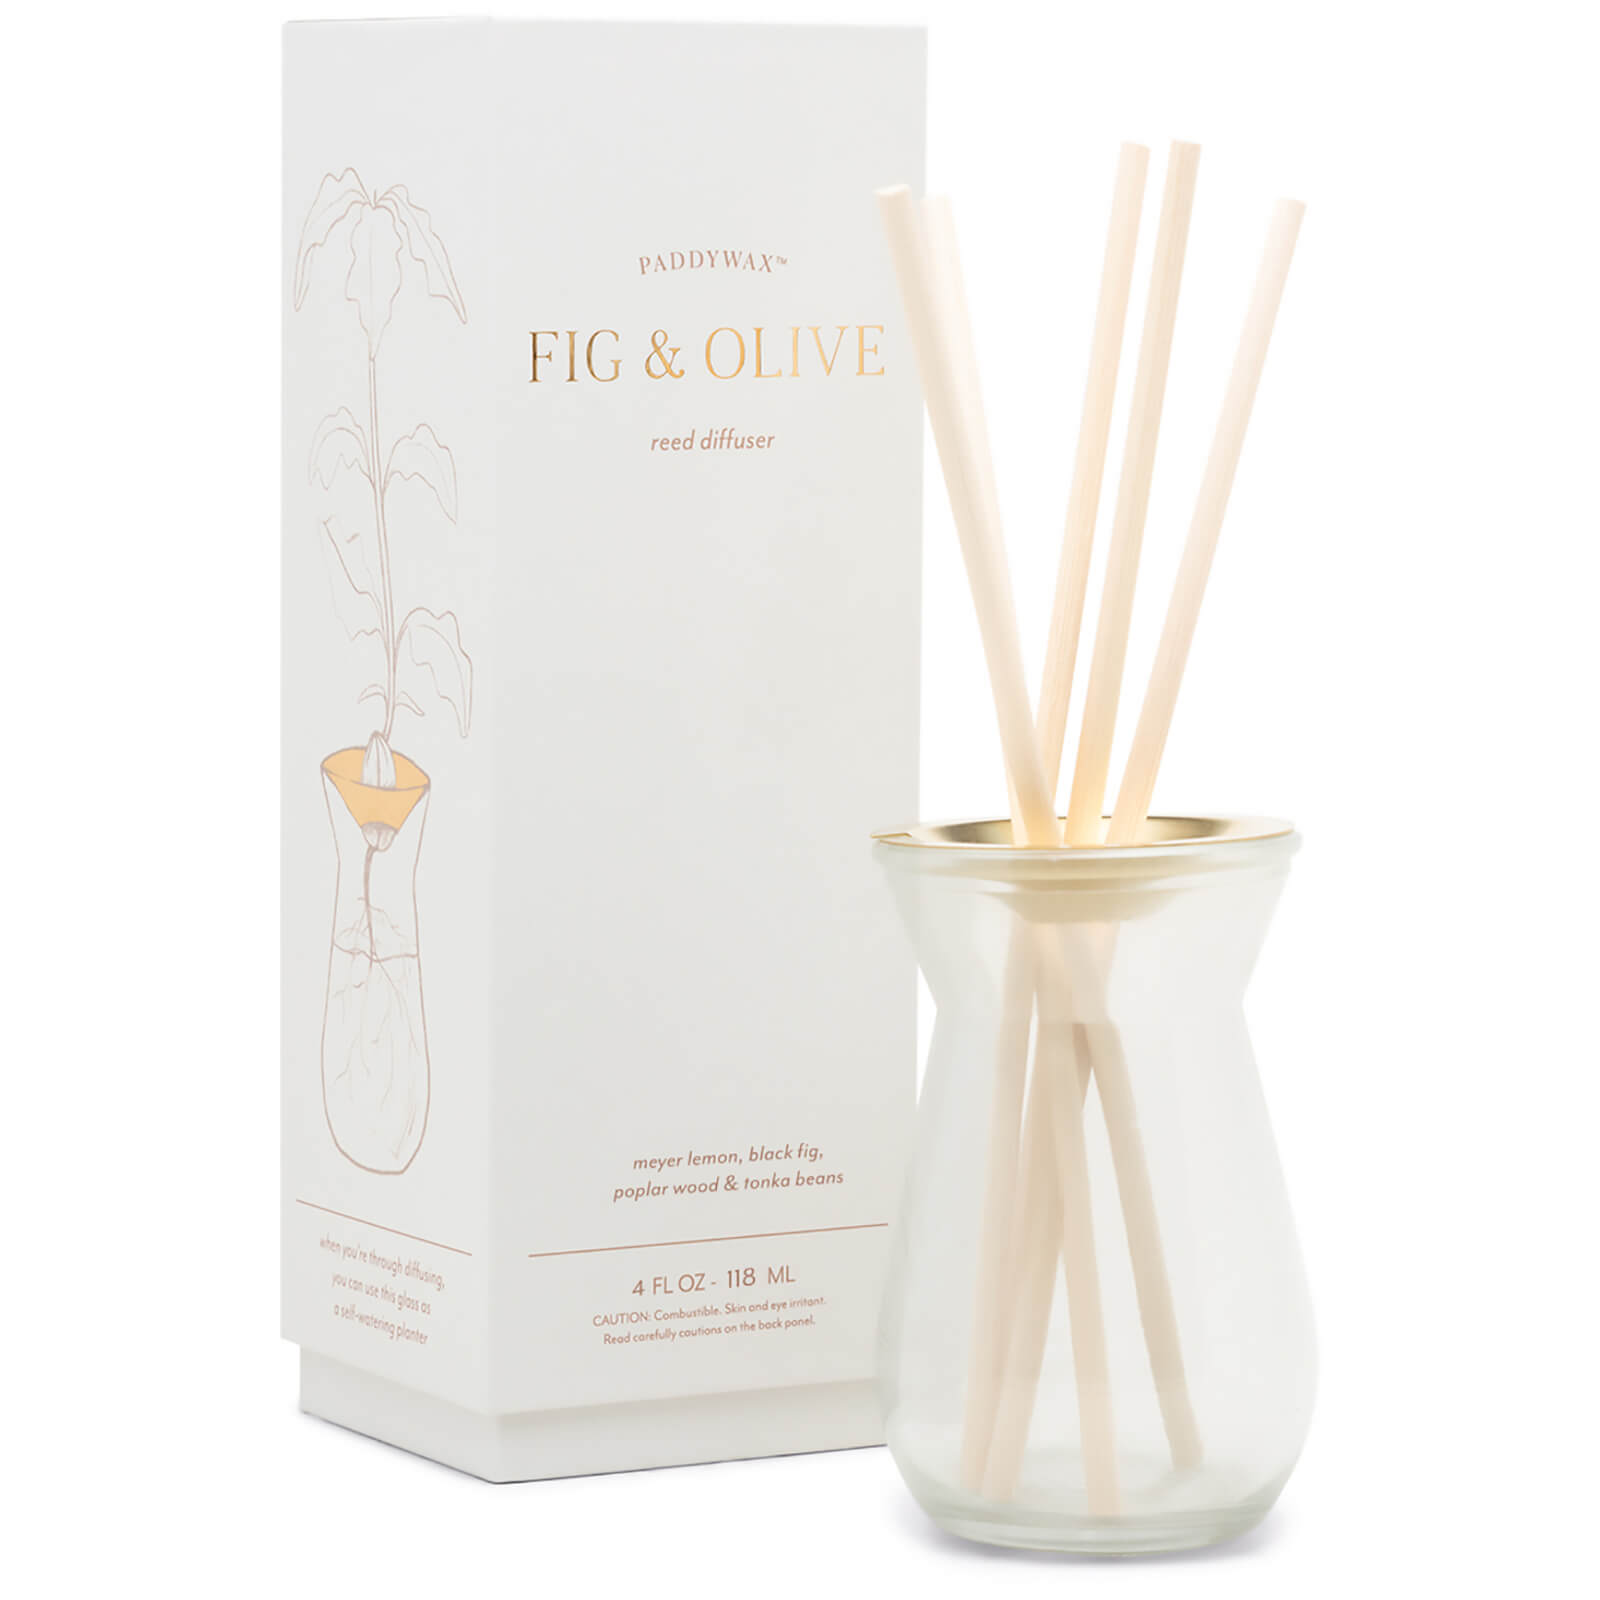 Image of Paddywax Fig and Olive Diffuser